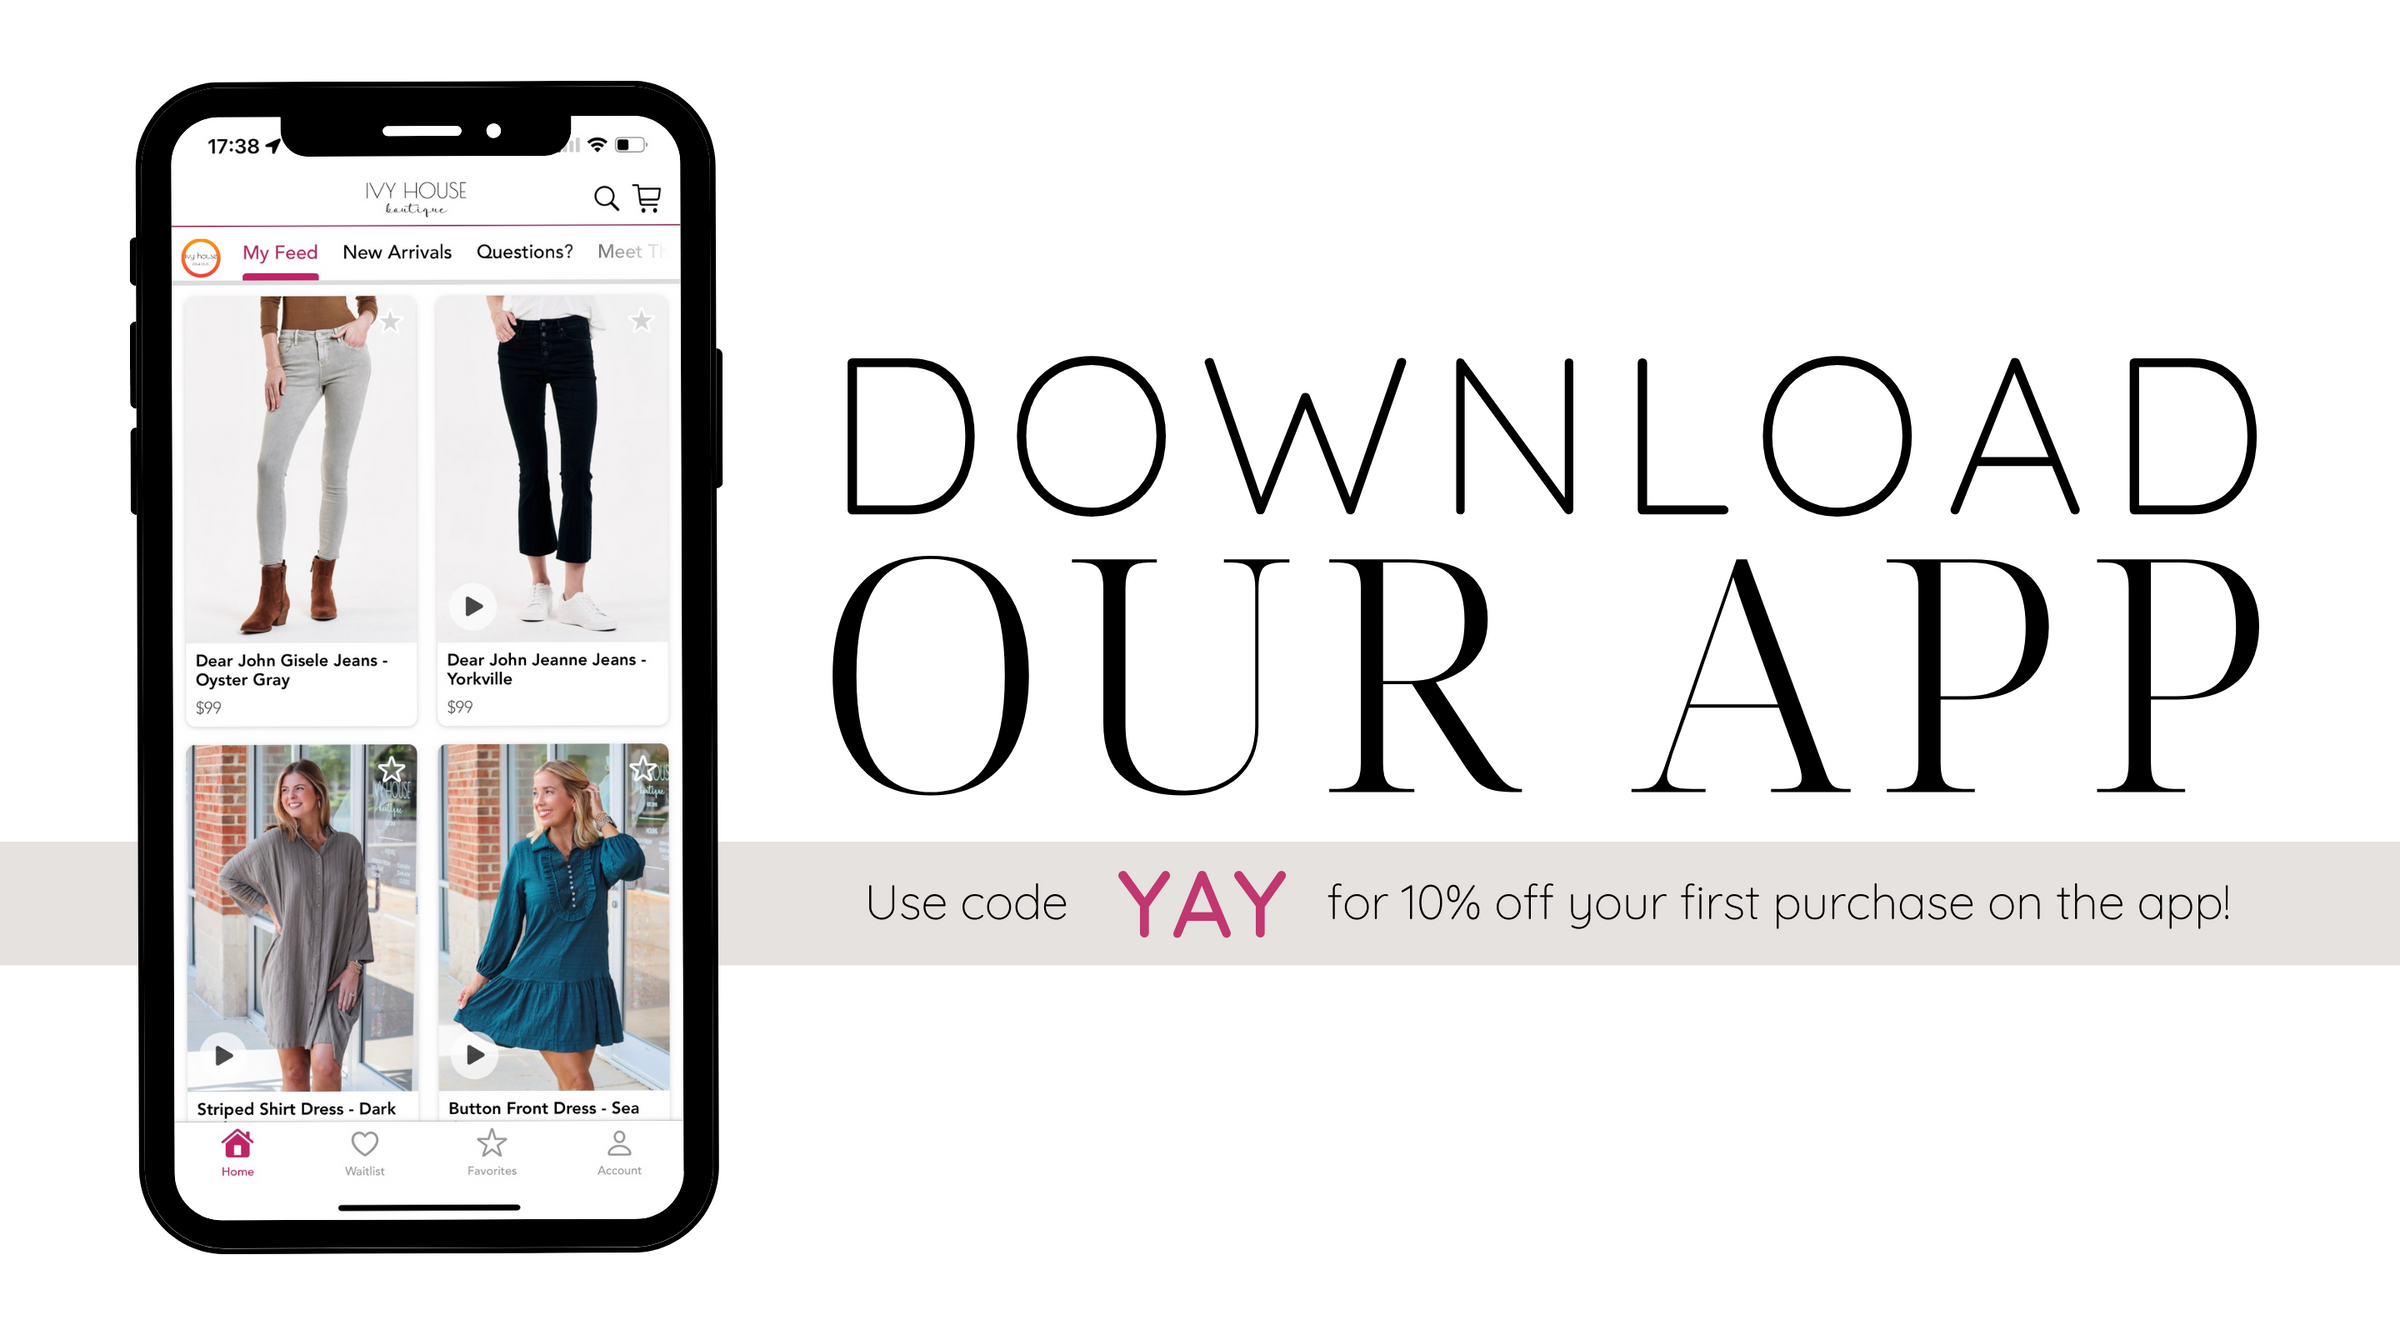 Image that shows a iphone on the left hand side with the Ivy House Boutique app open, featuring four products (two dresses and two pairs of jeans). On the right side of the image, it says "download our app. Use code yay for 10% off your first purchase on the app!"